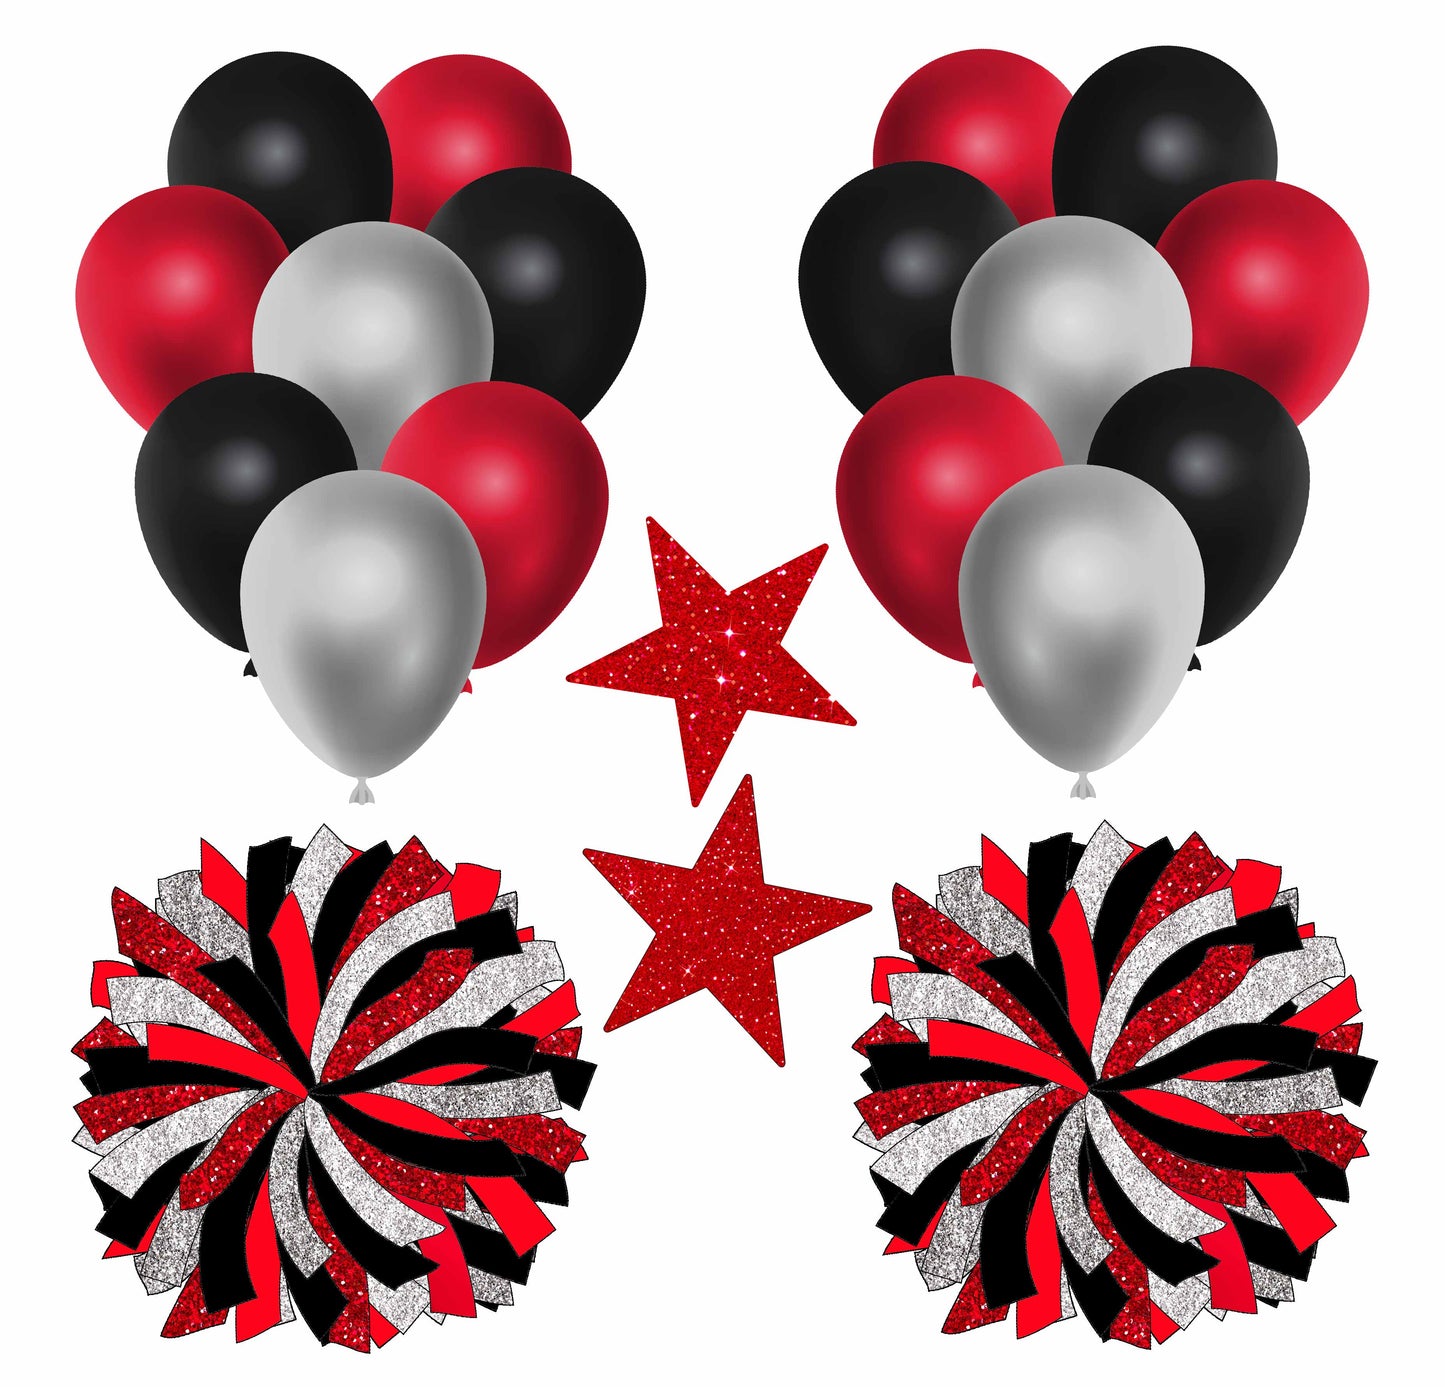 Black Silver Red Balloons and Pom Poms Half Sheet  (Must Purchase 2 Half sheets - You Can Mix & Match)